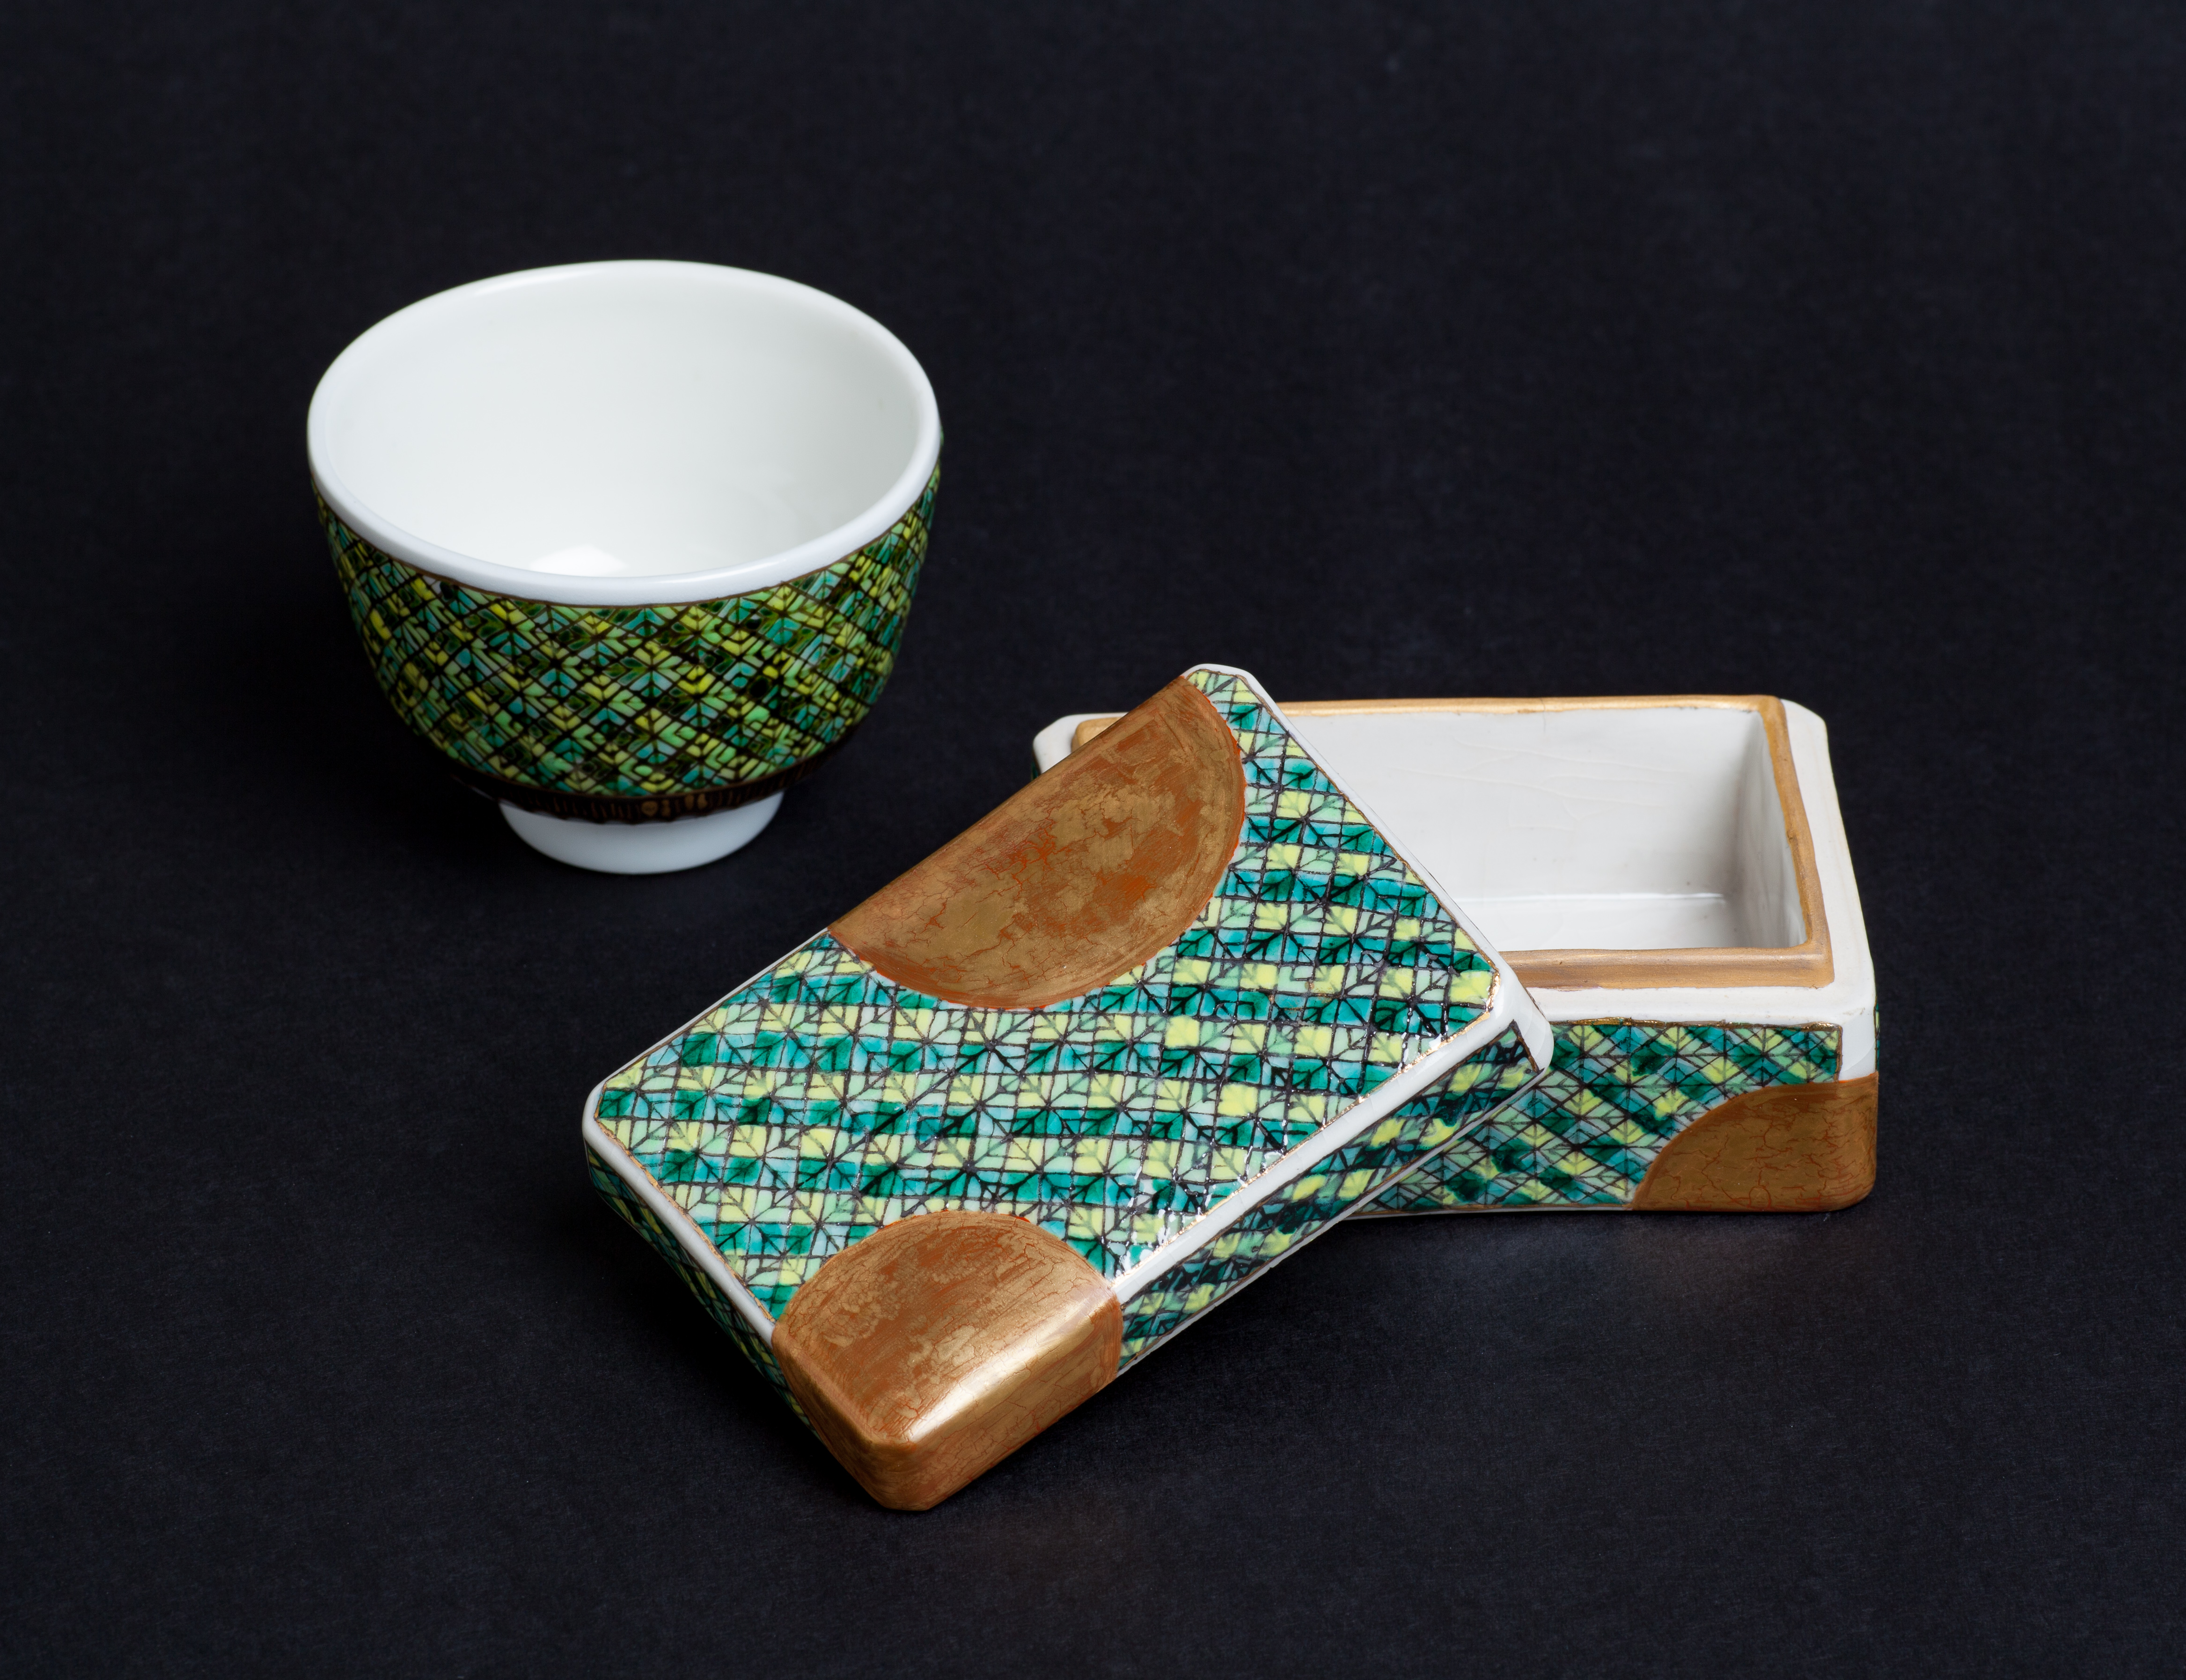 Woven Series, Carved Box and Teacup